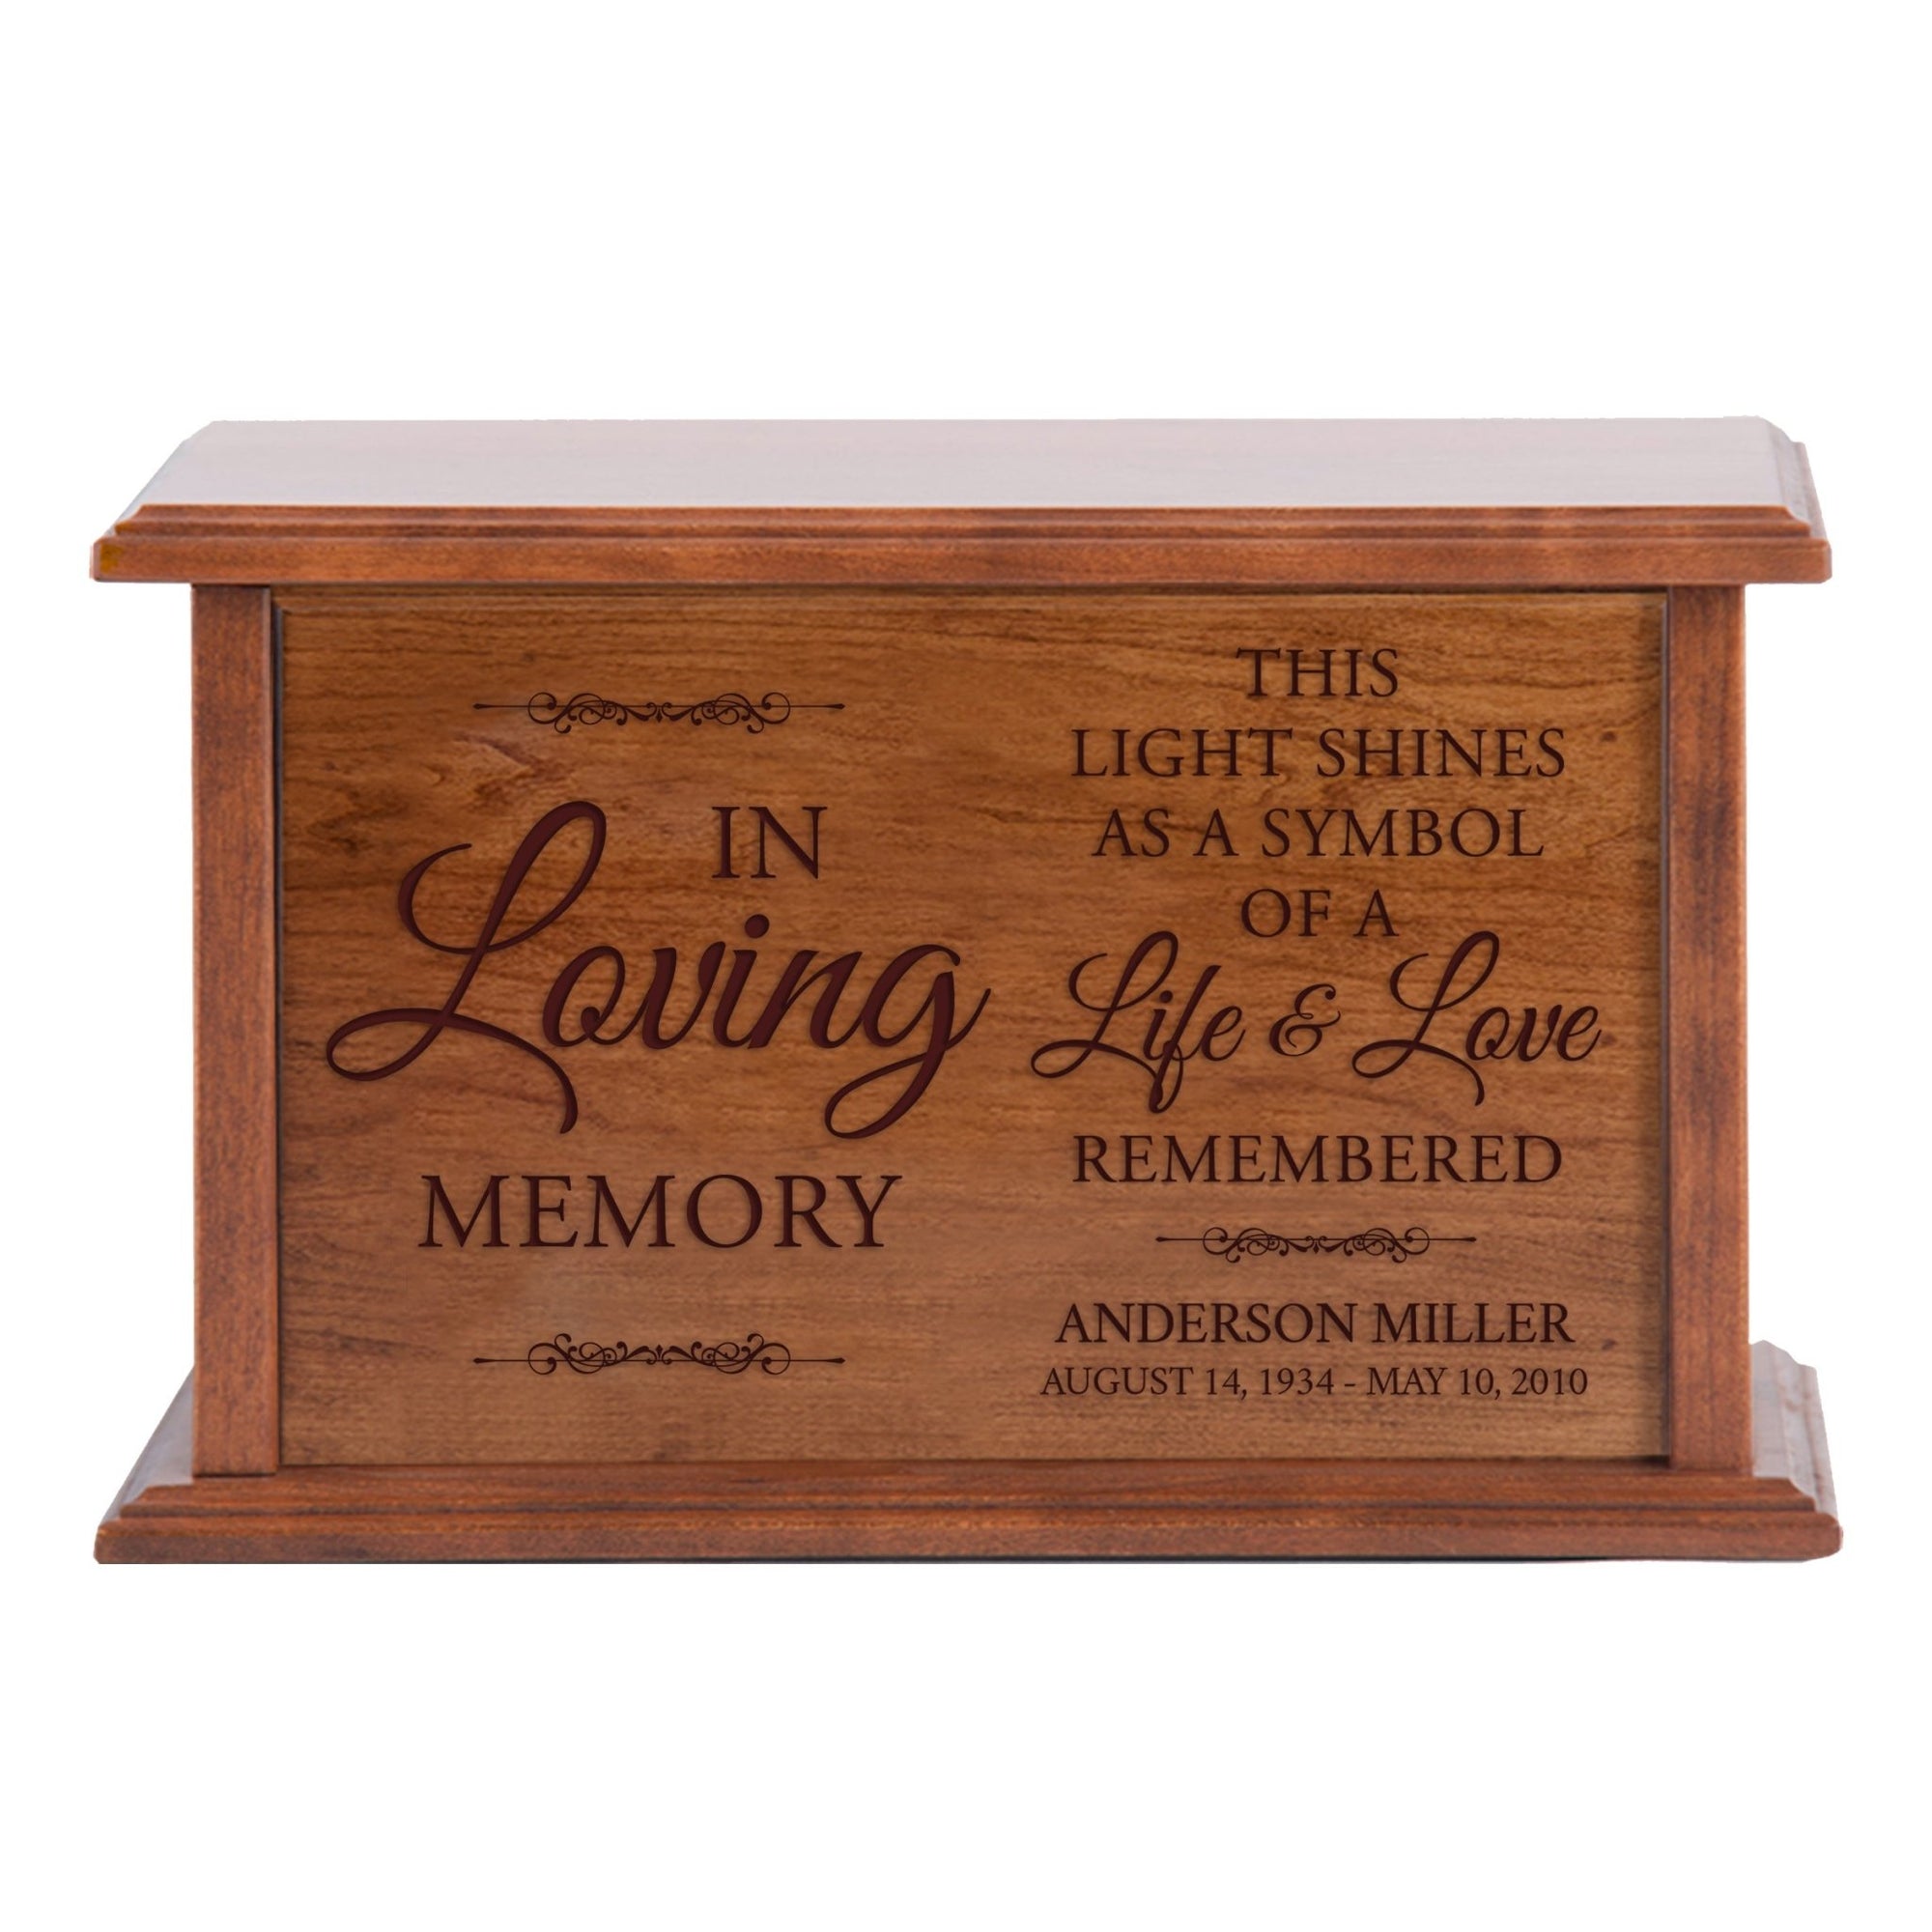 Custom Engraved Wooden Memorial Urns for Human Adult Ashes - In Loving Memory This Light